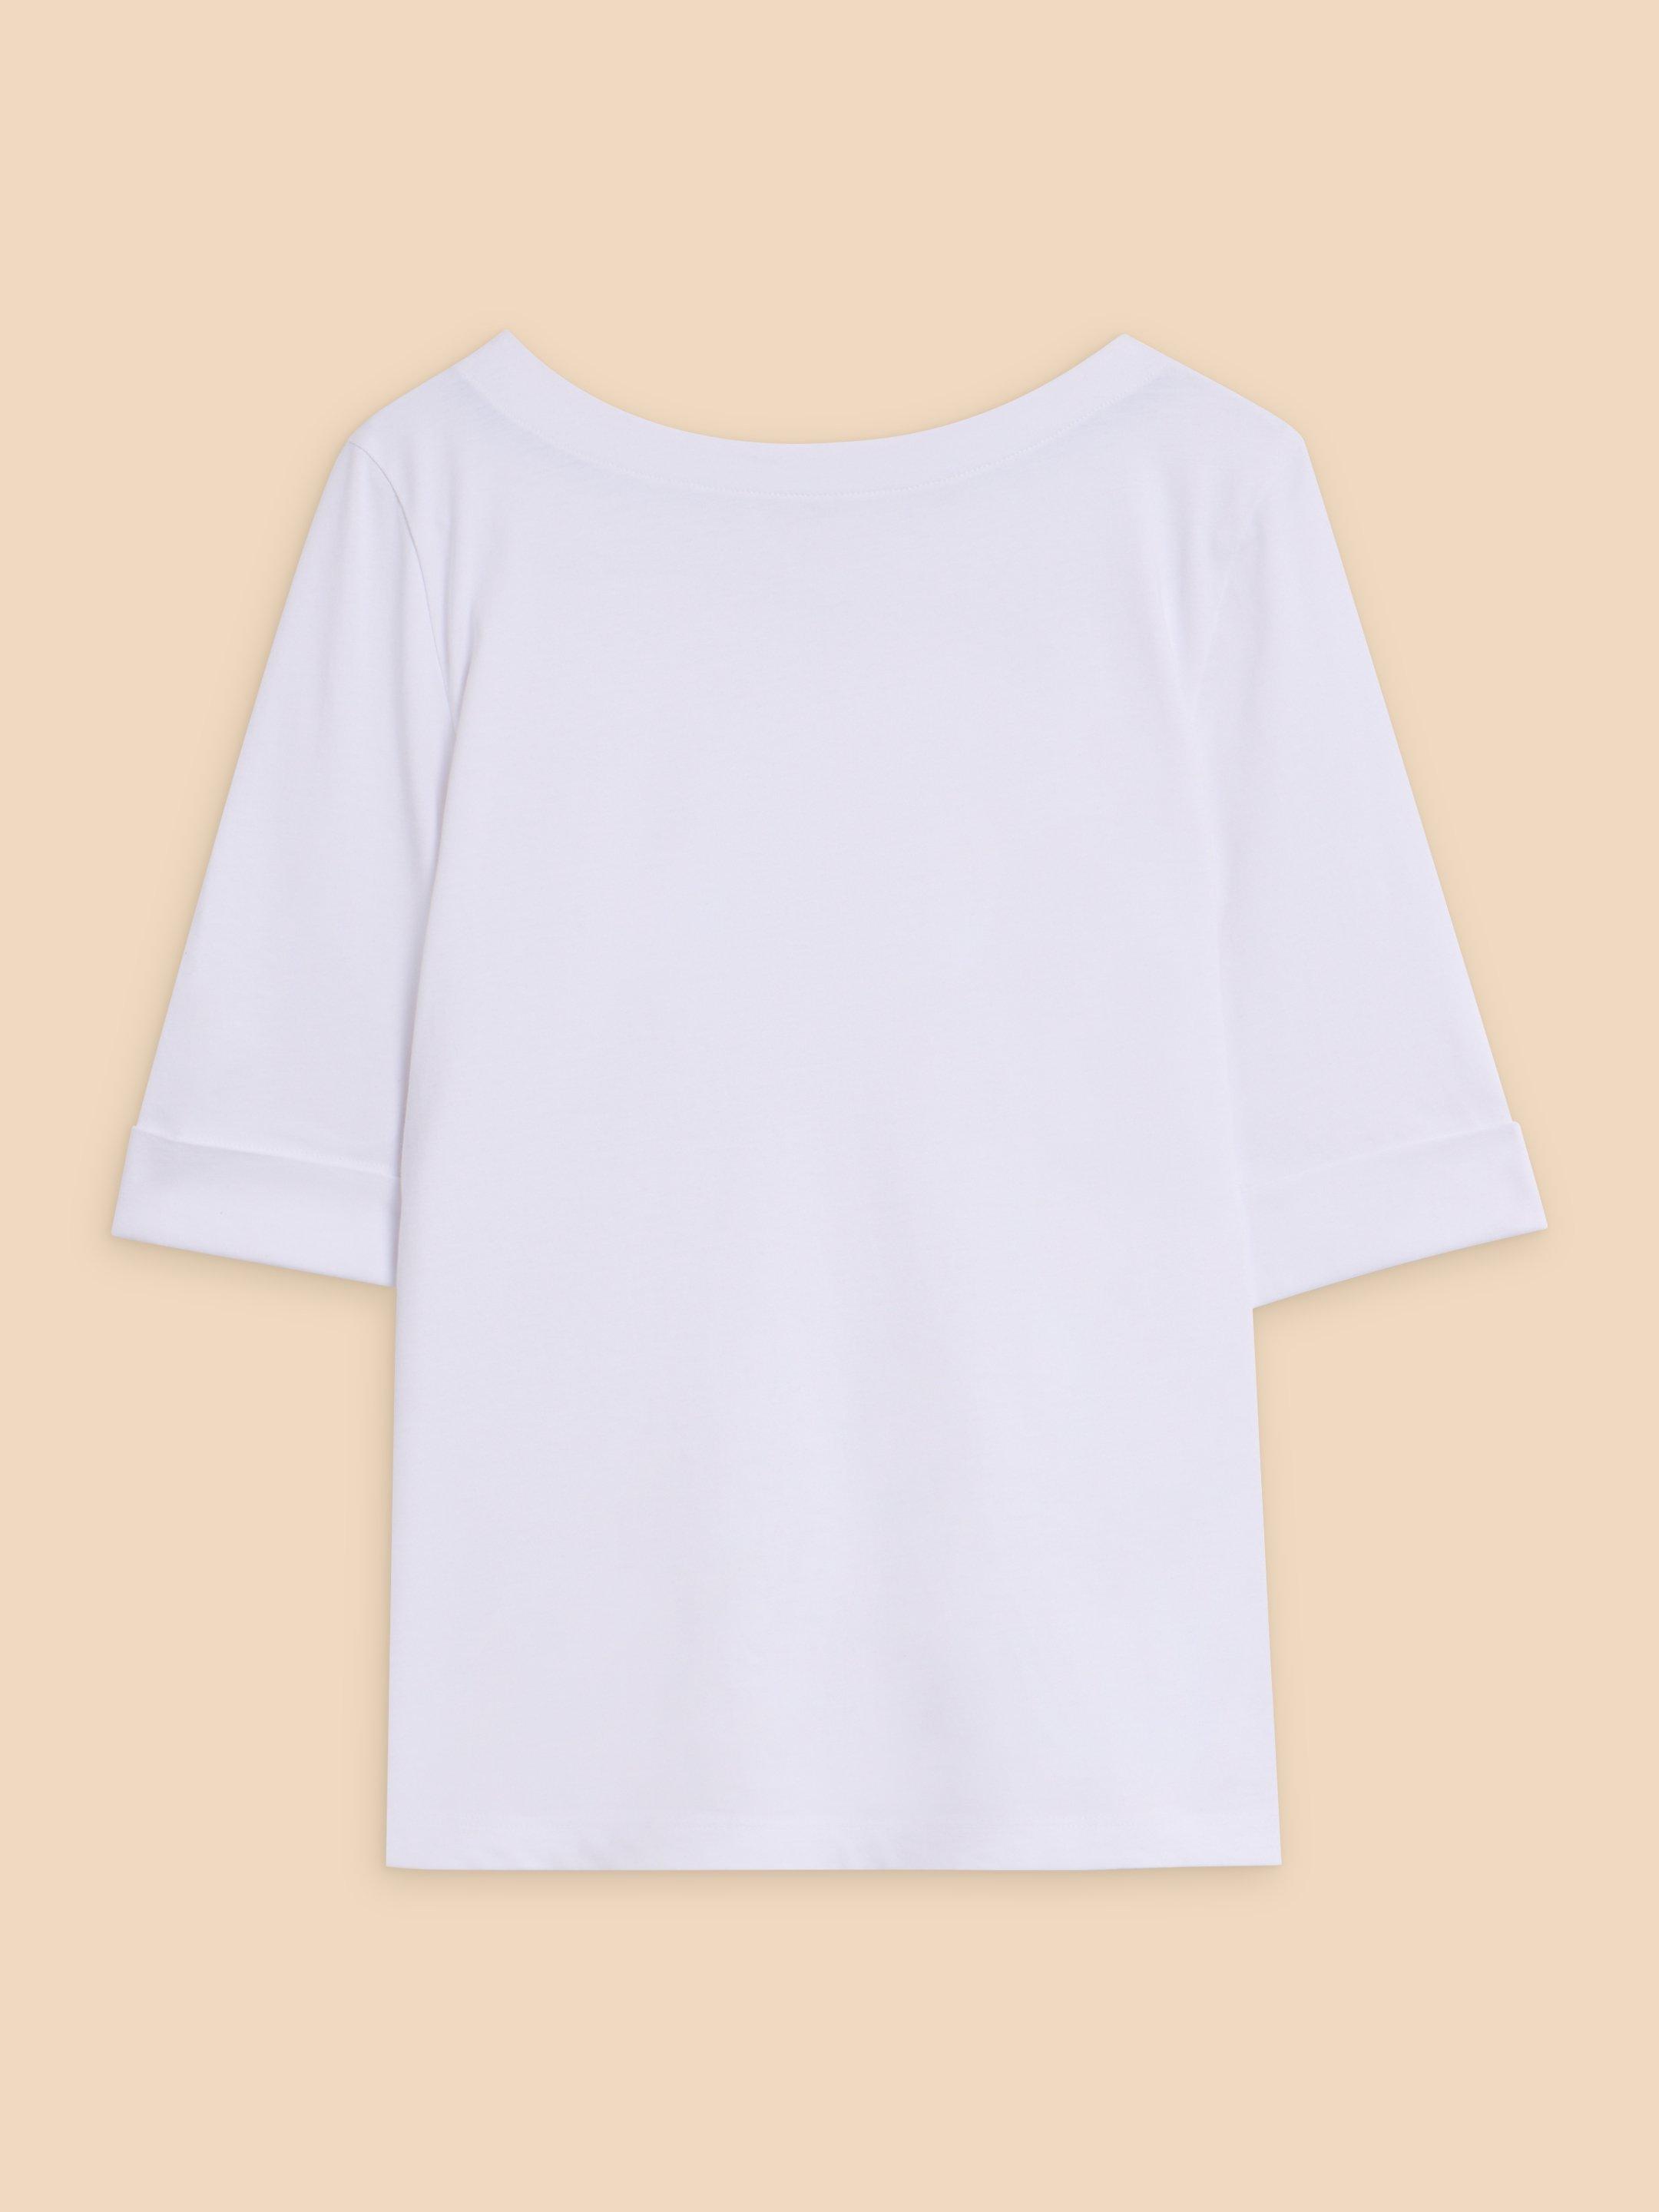 SYDNEY BOAT NECK TEE in BRIL WHITE - FLAT FRONT